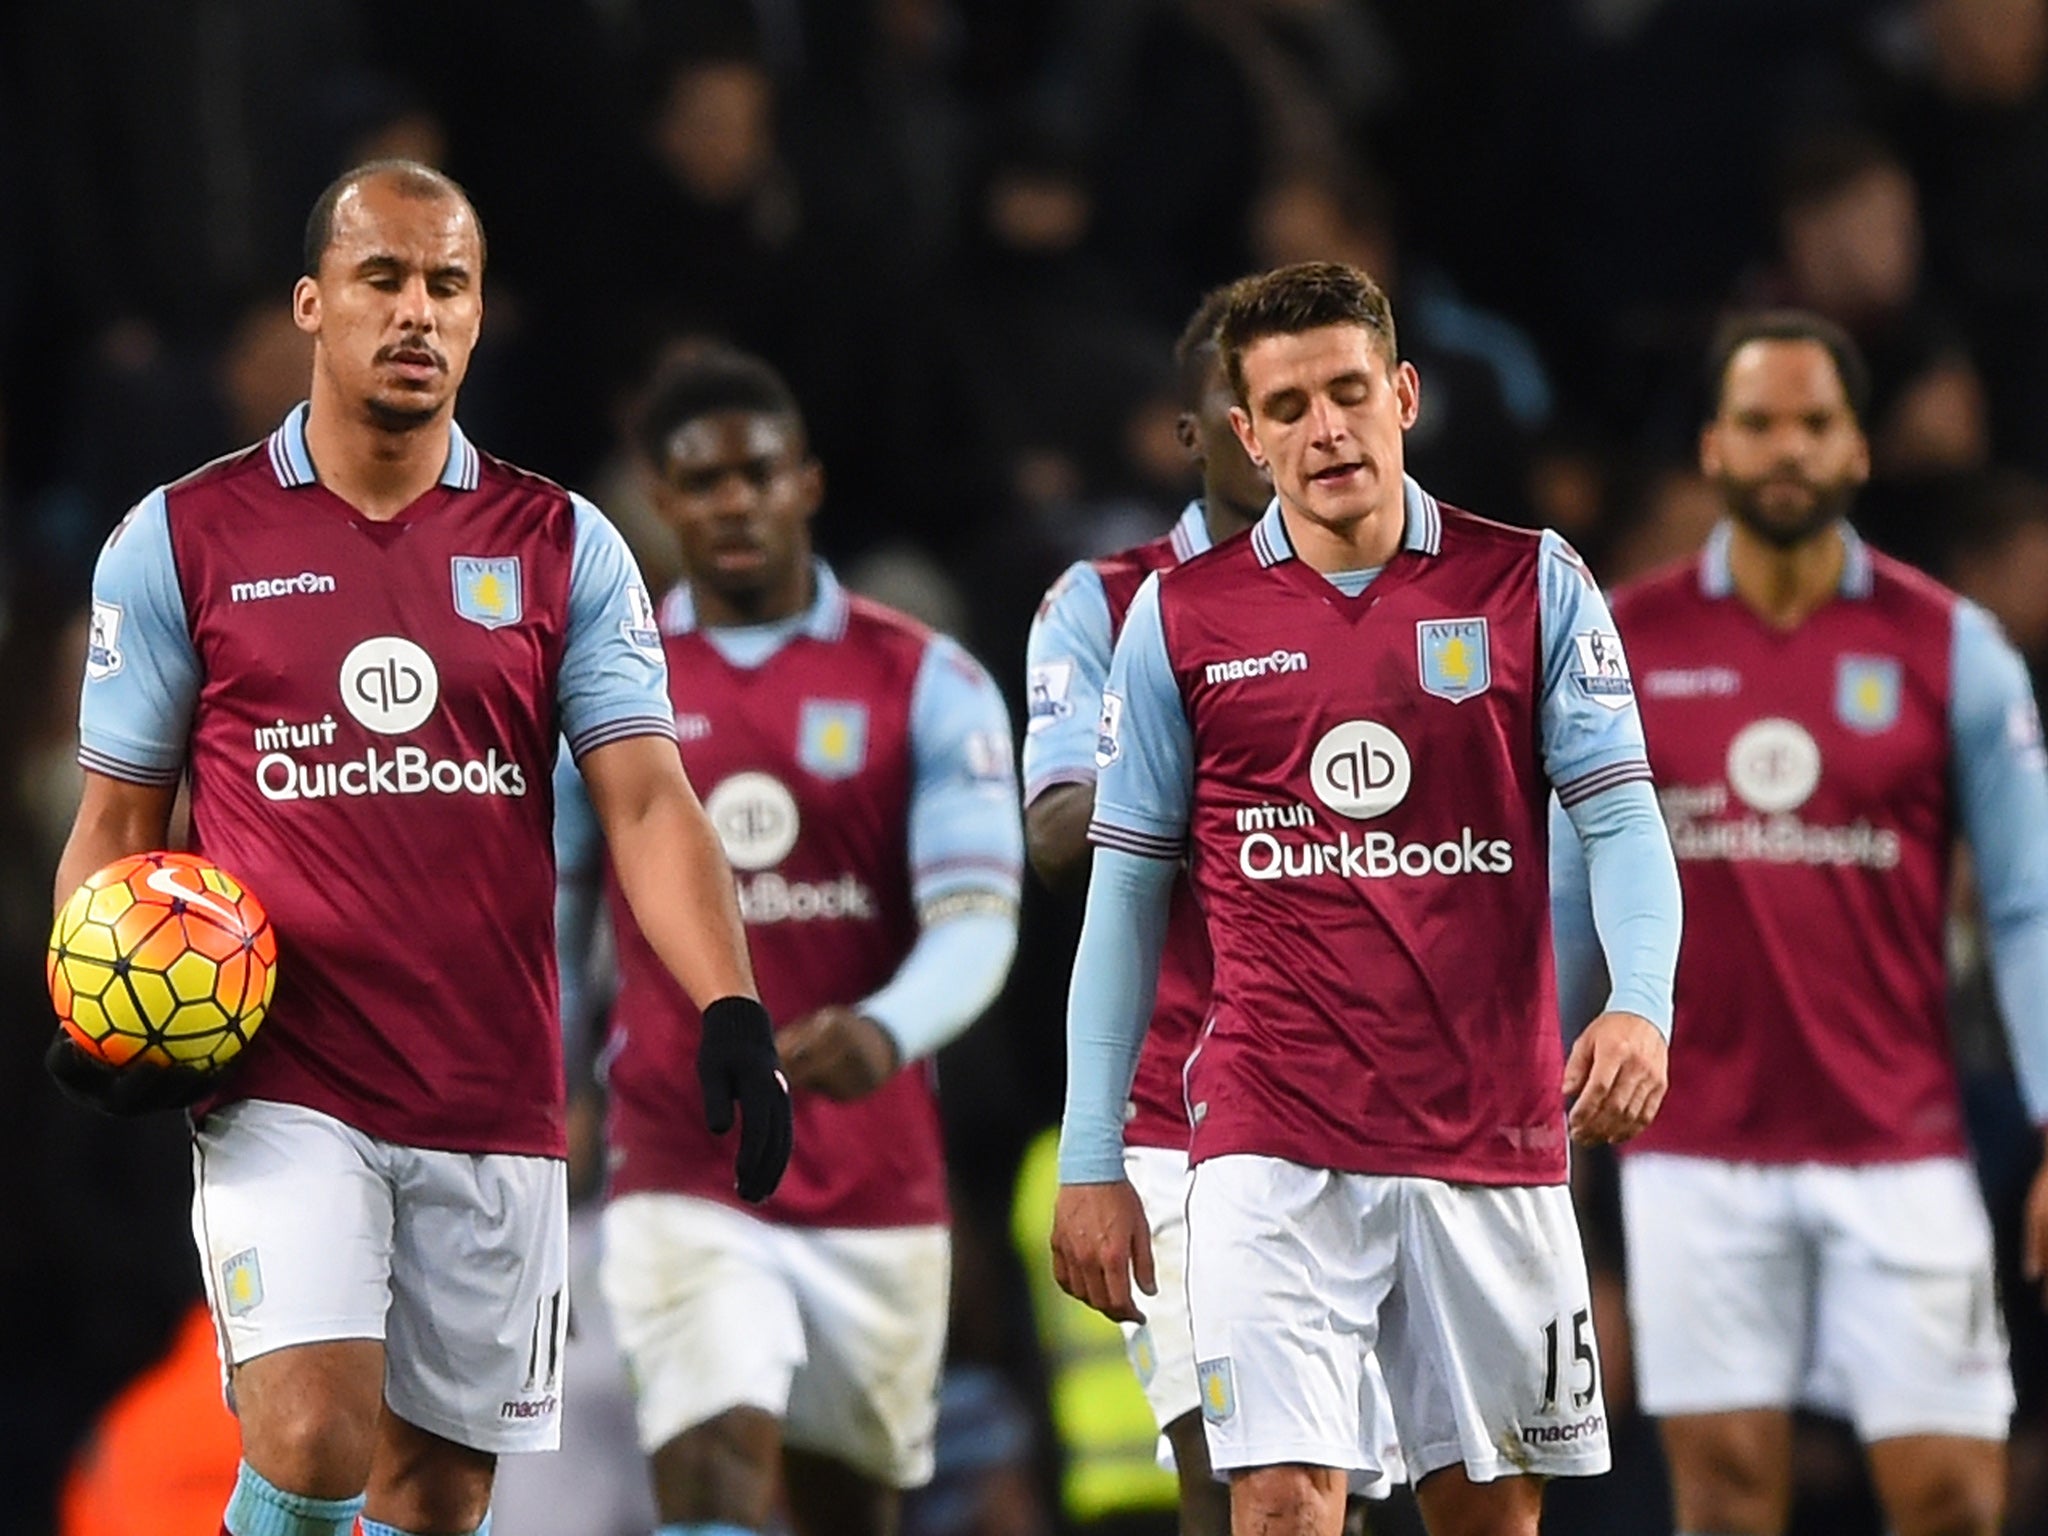 Villa are expected to suffer their first relegation in 29 years this weekend